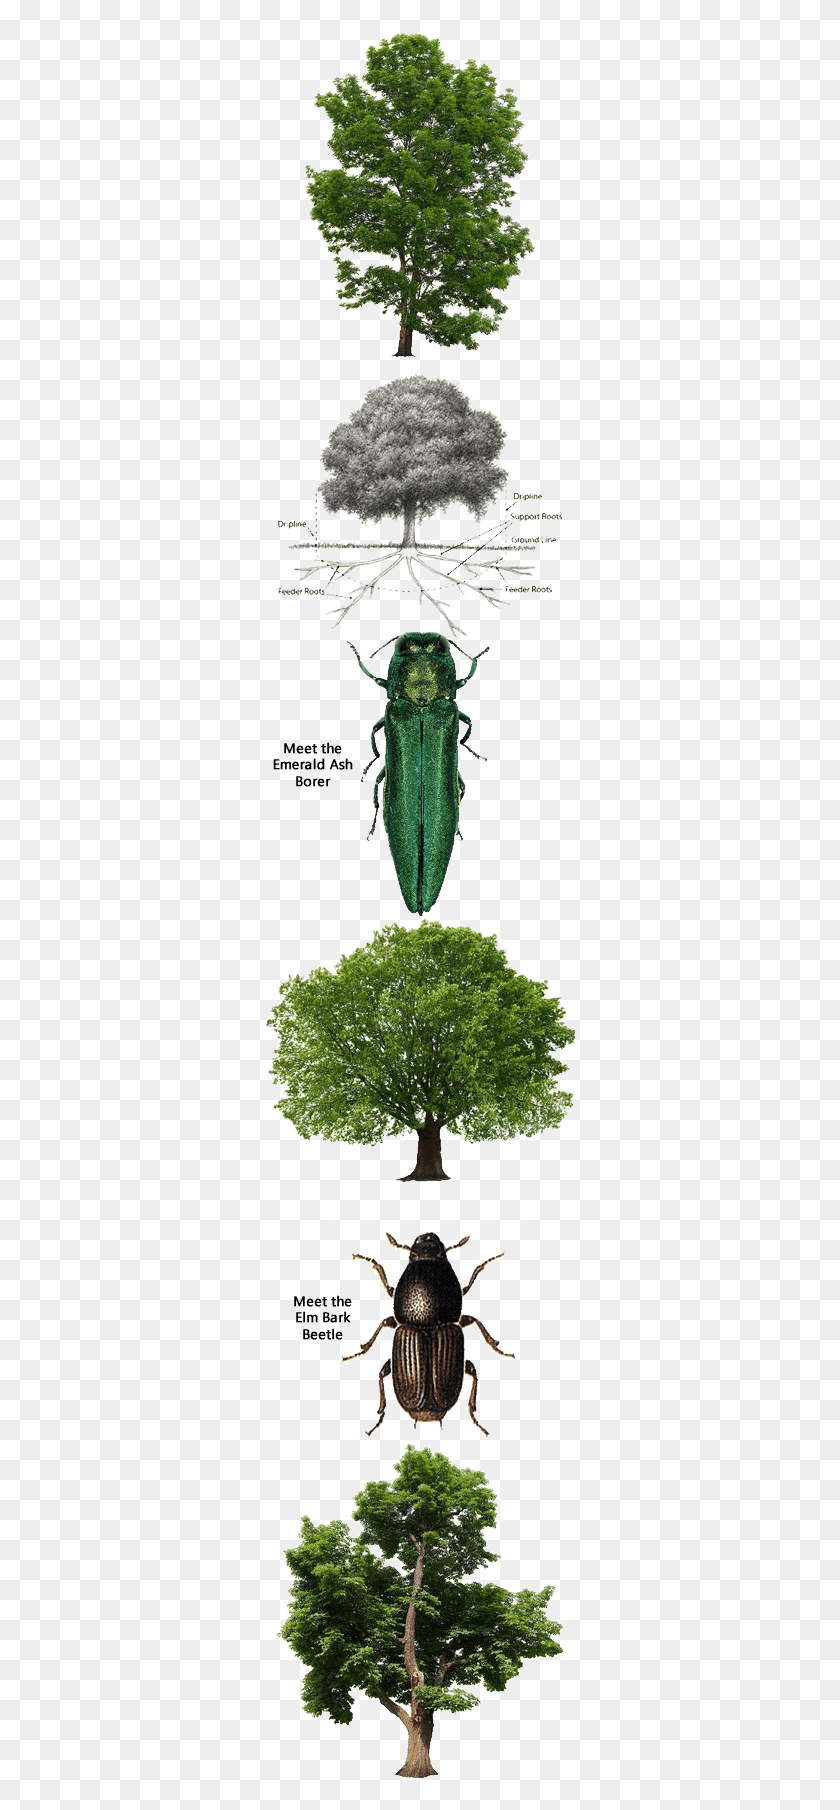 311x1750 These May Include Horticultural Oils Insecticidal Longhorn Beetle, Plant, Tree, Leaf Descargar Hd Png